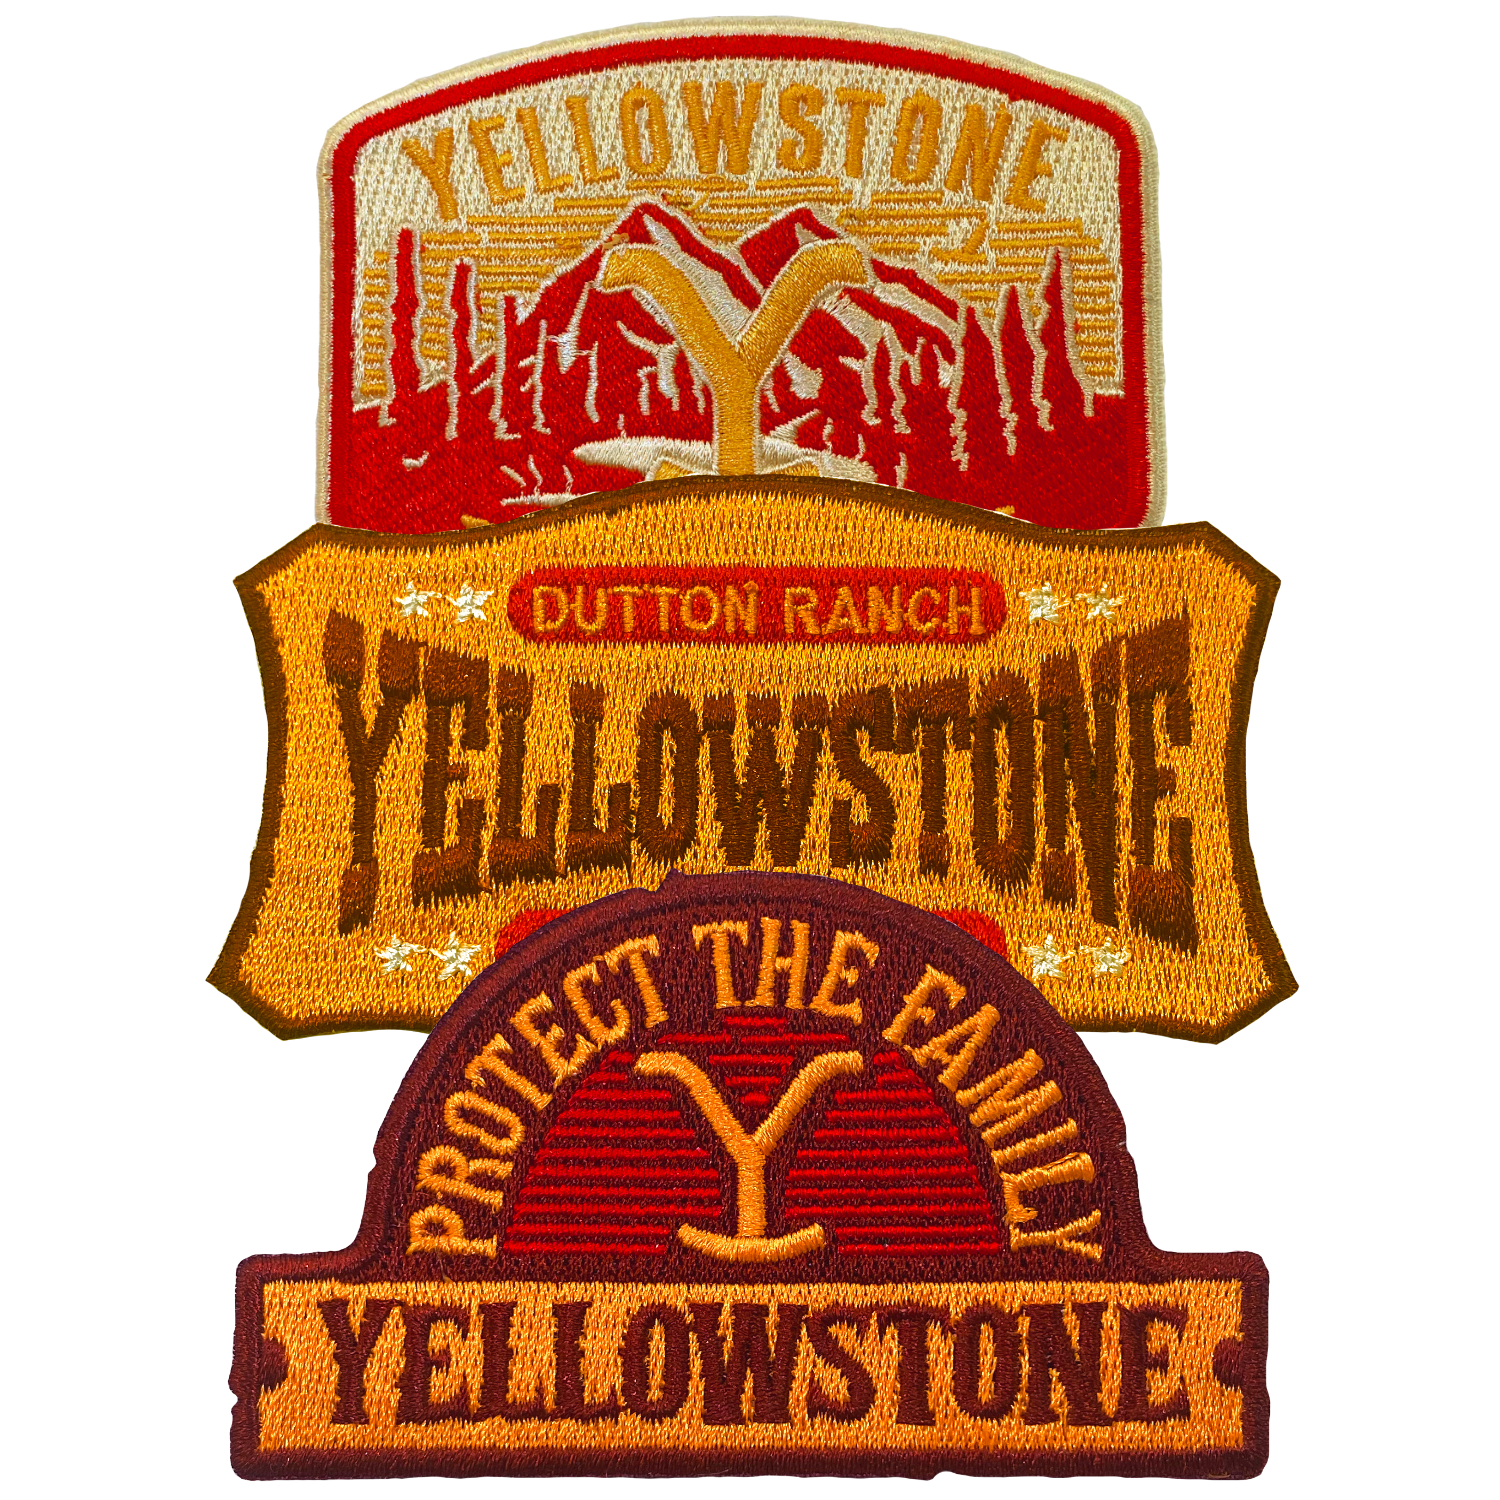 Yellowstone Dutton Ranch Logo Giant Peel & Stick Wall Decals